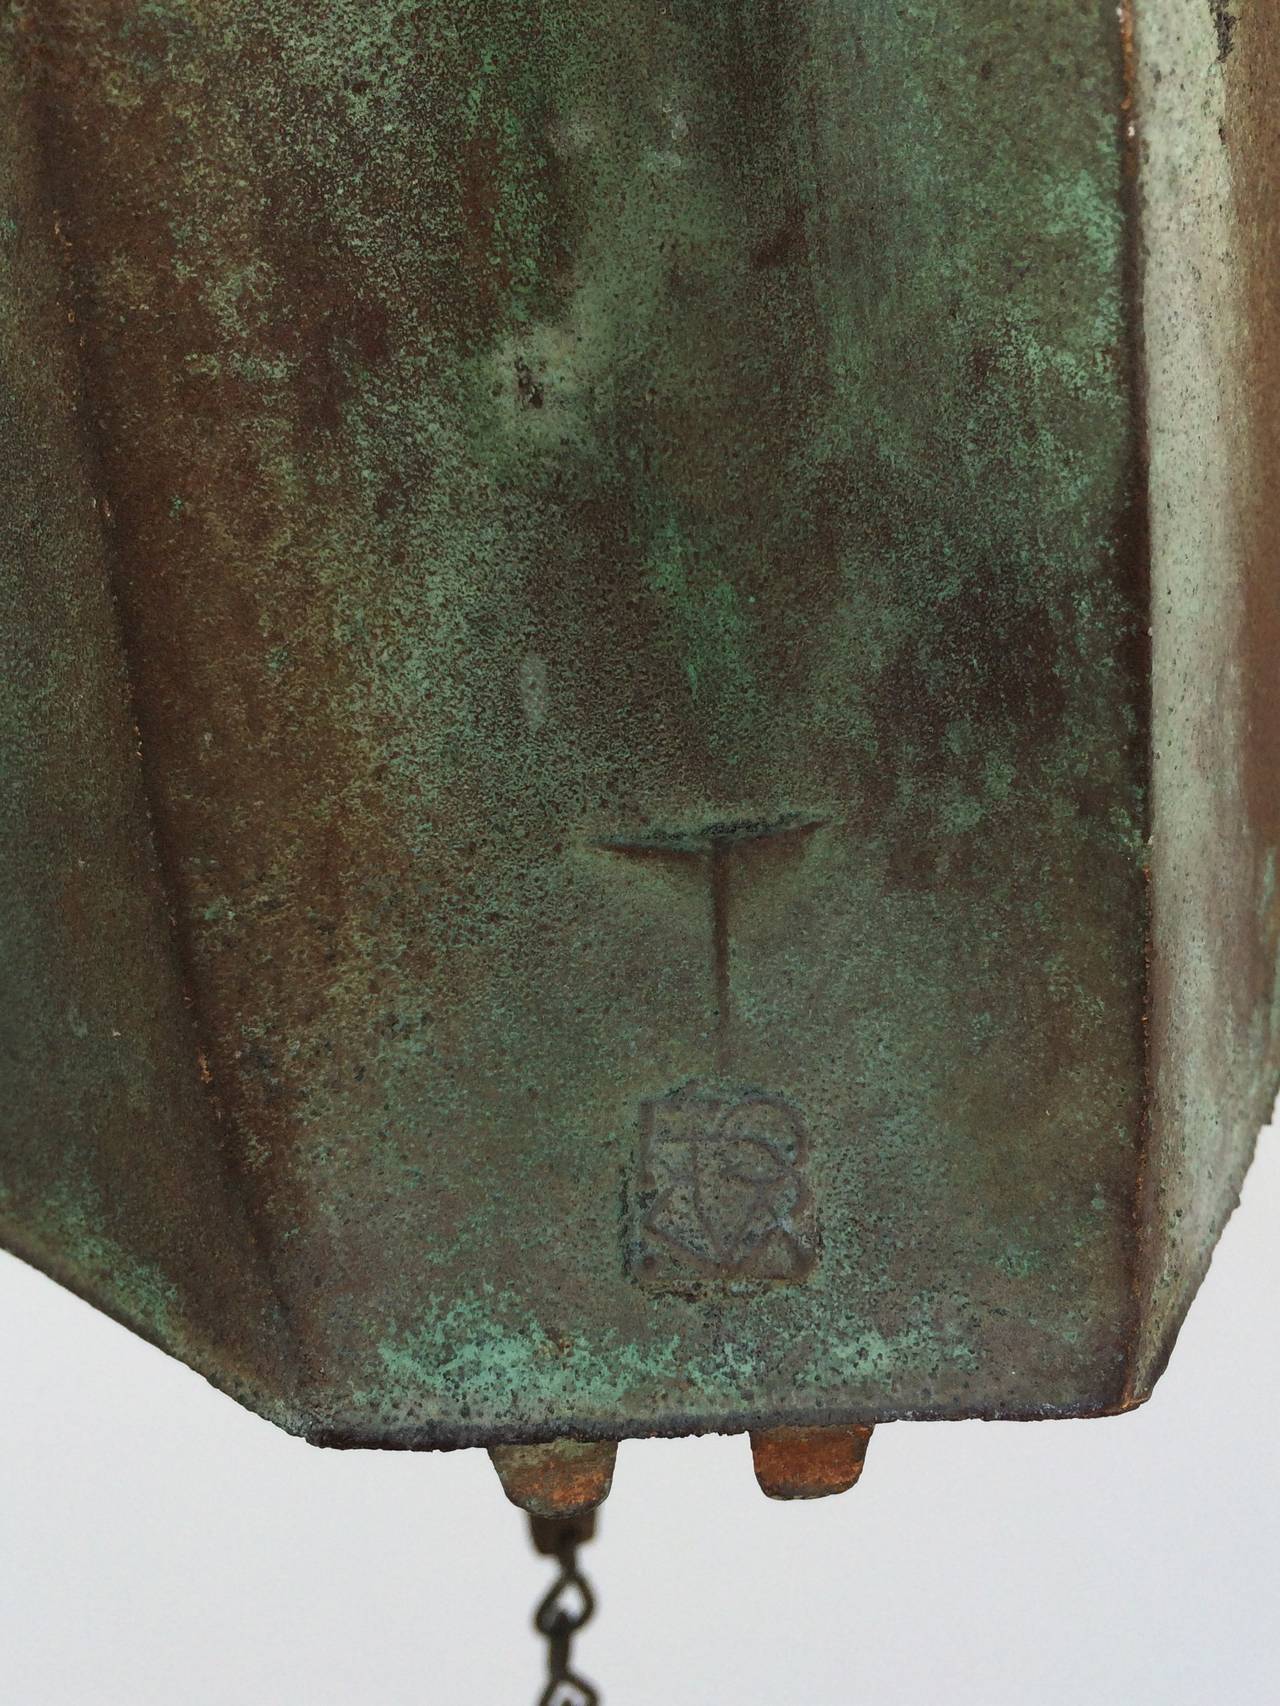 American Large-Scale Sculptural Bronze Wind Bell Designed by Paolo Soleri